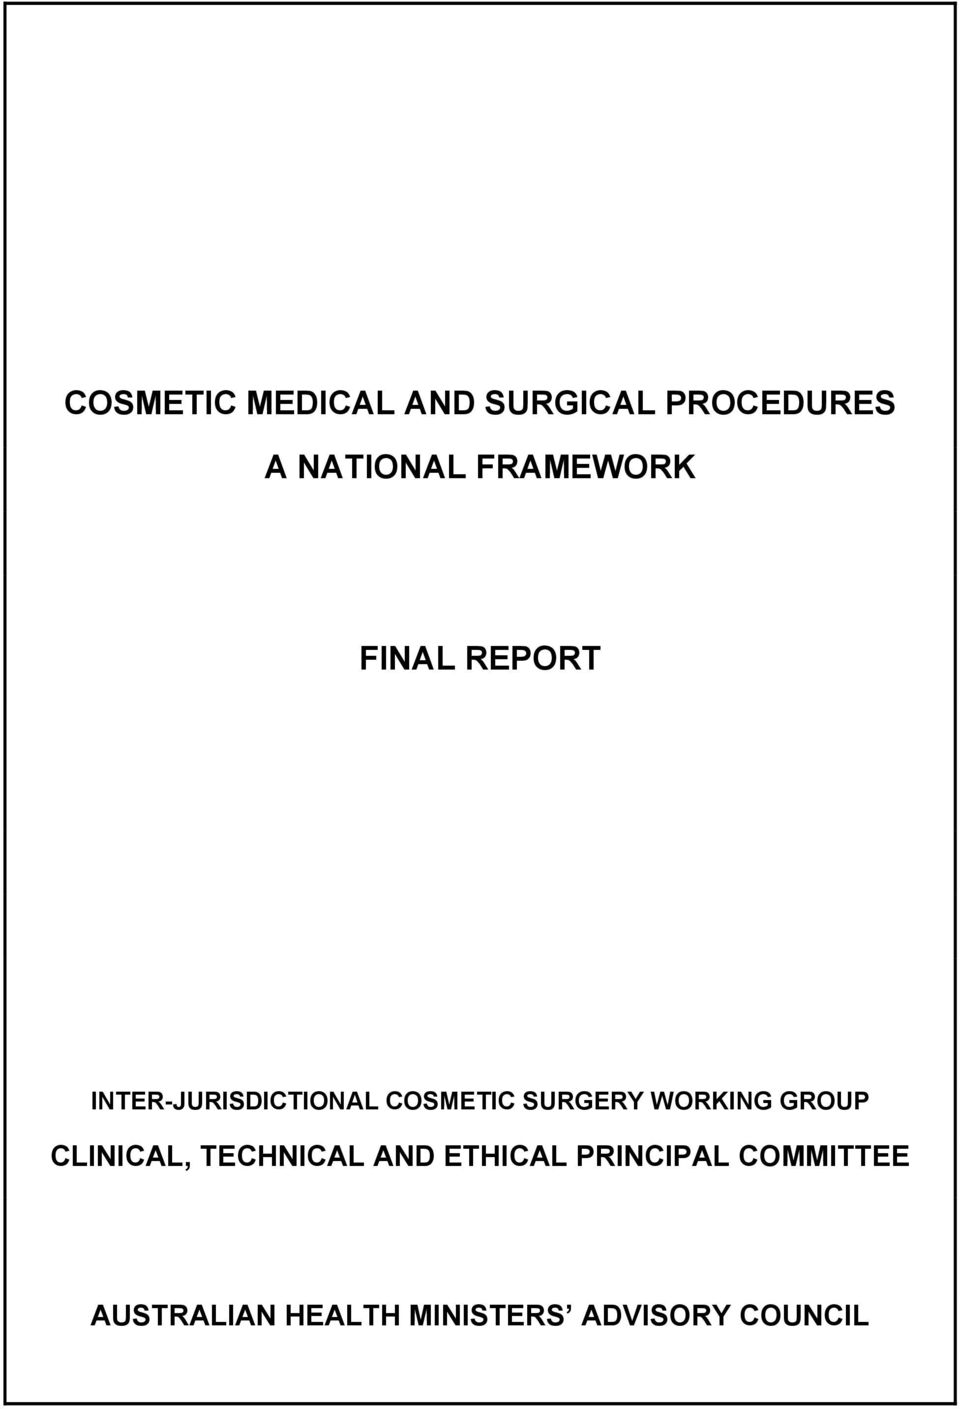 SURGERY WORKING GROUP CLINICAL, TECHNICAL AND ETHICAL